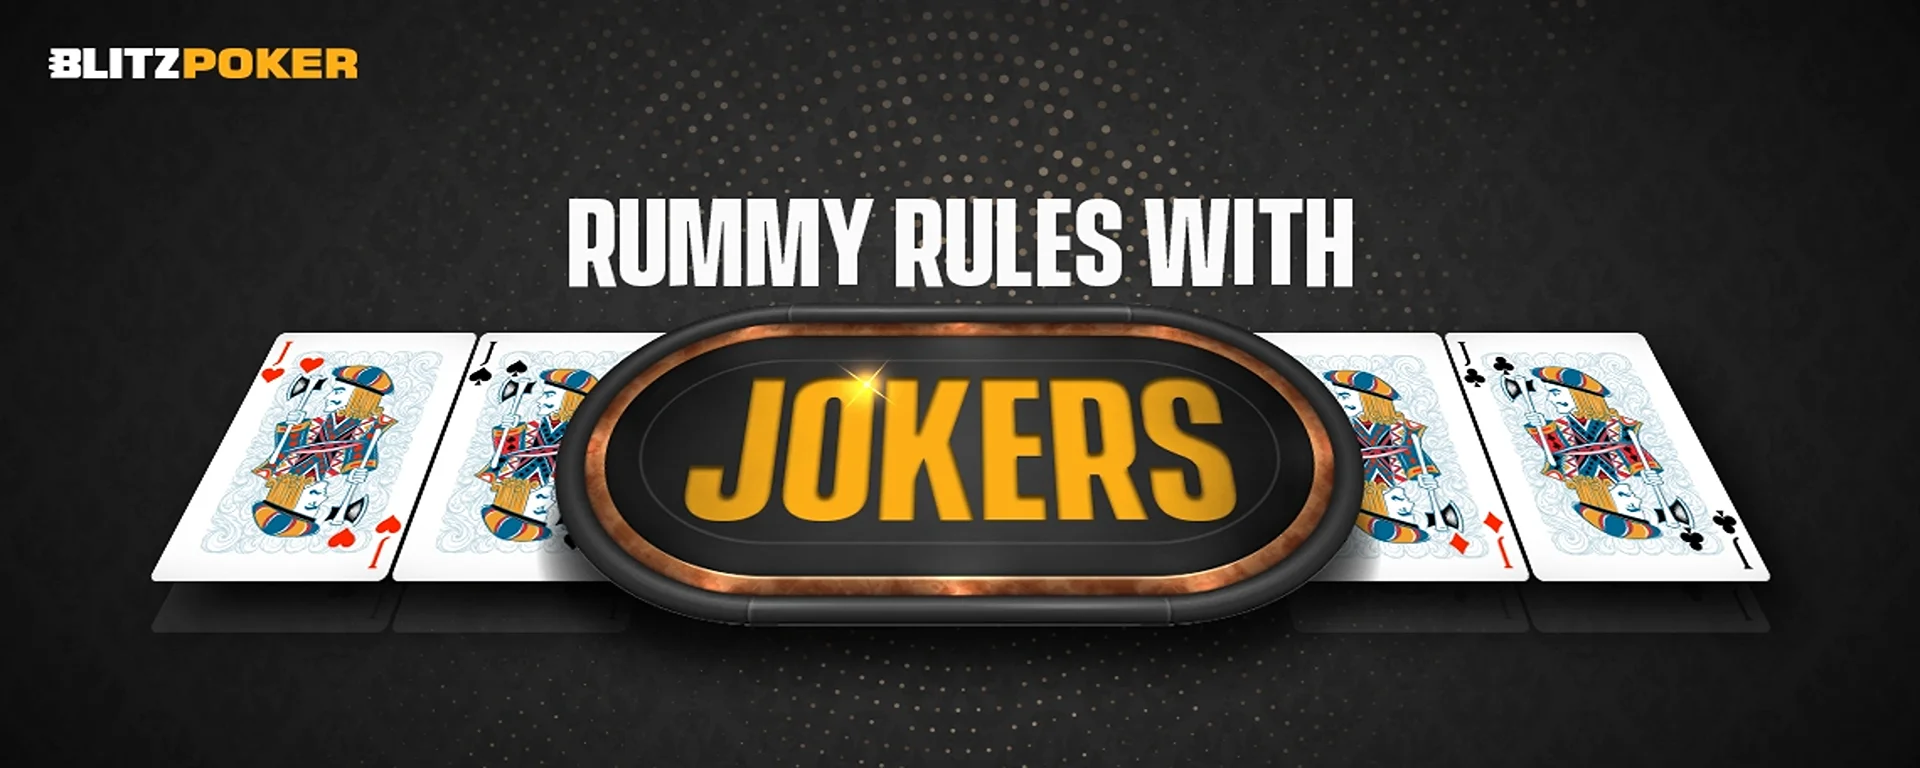 Rummy Rules With Jokers